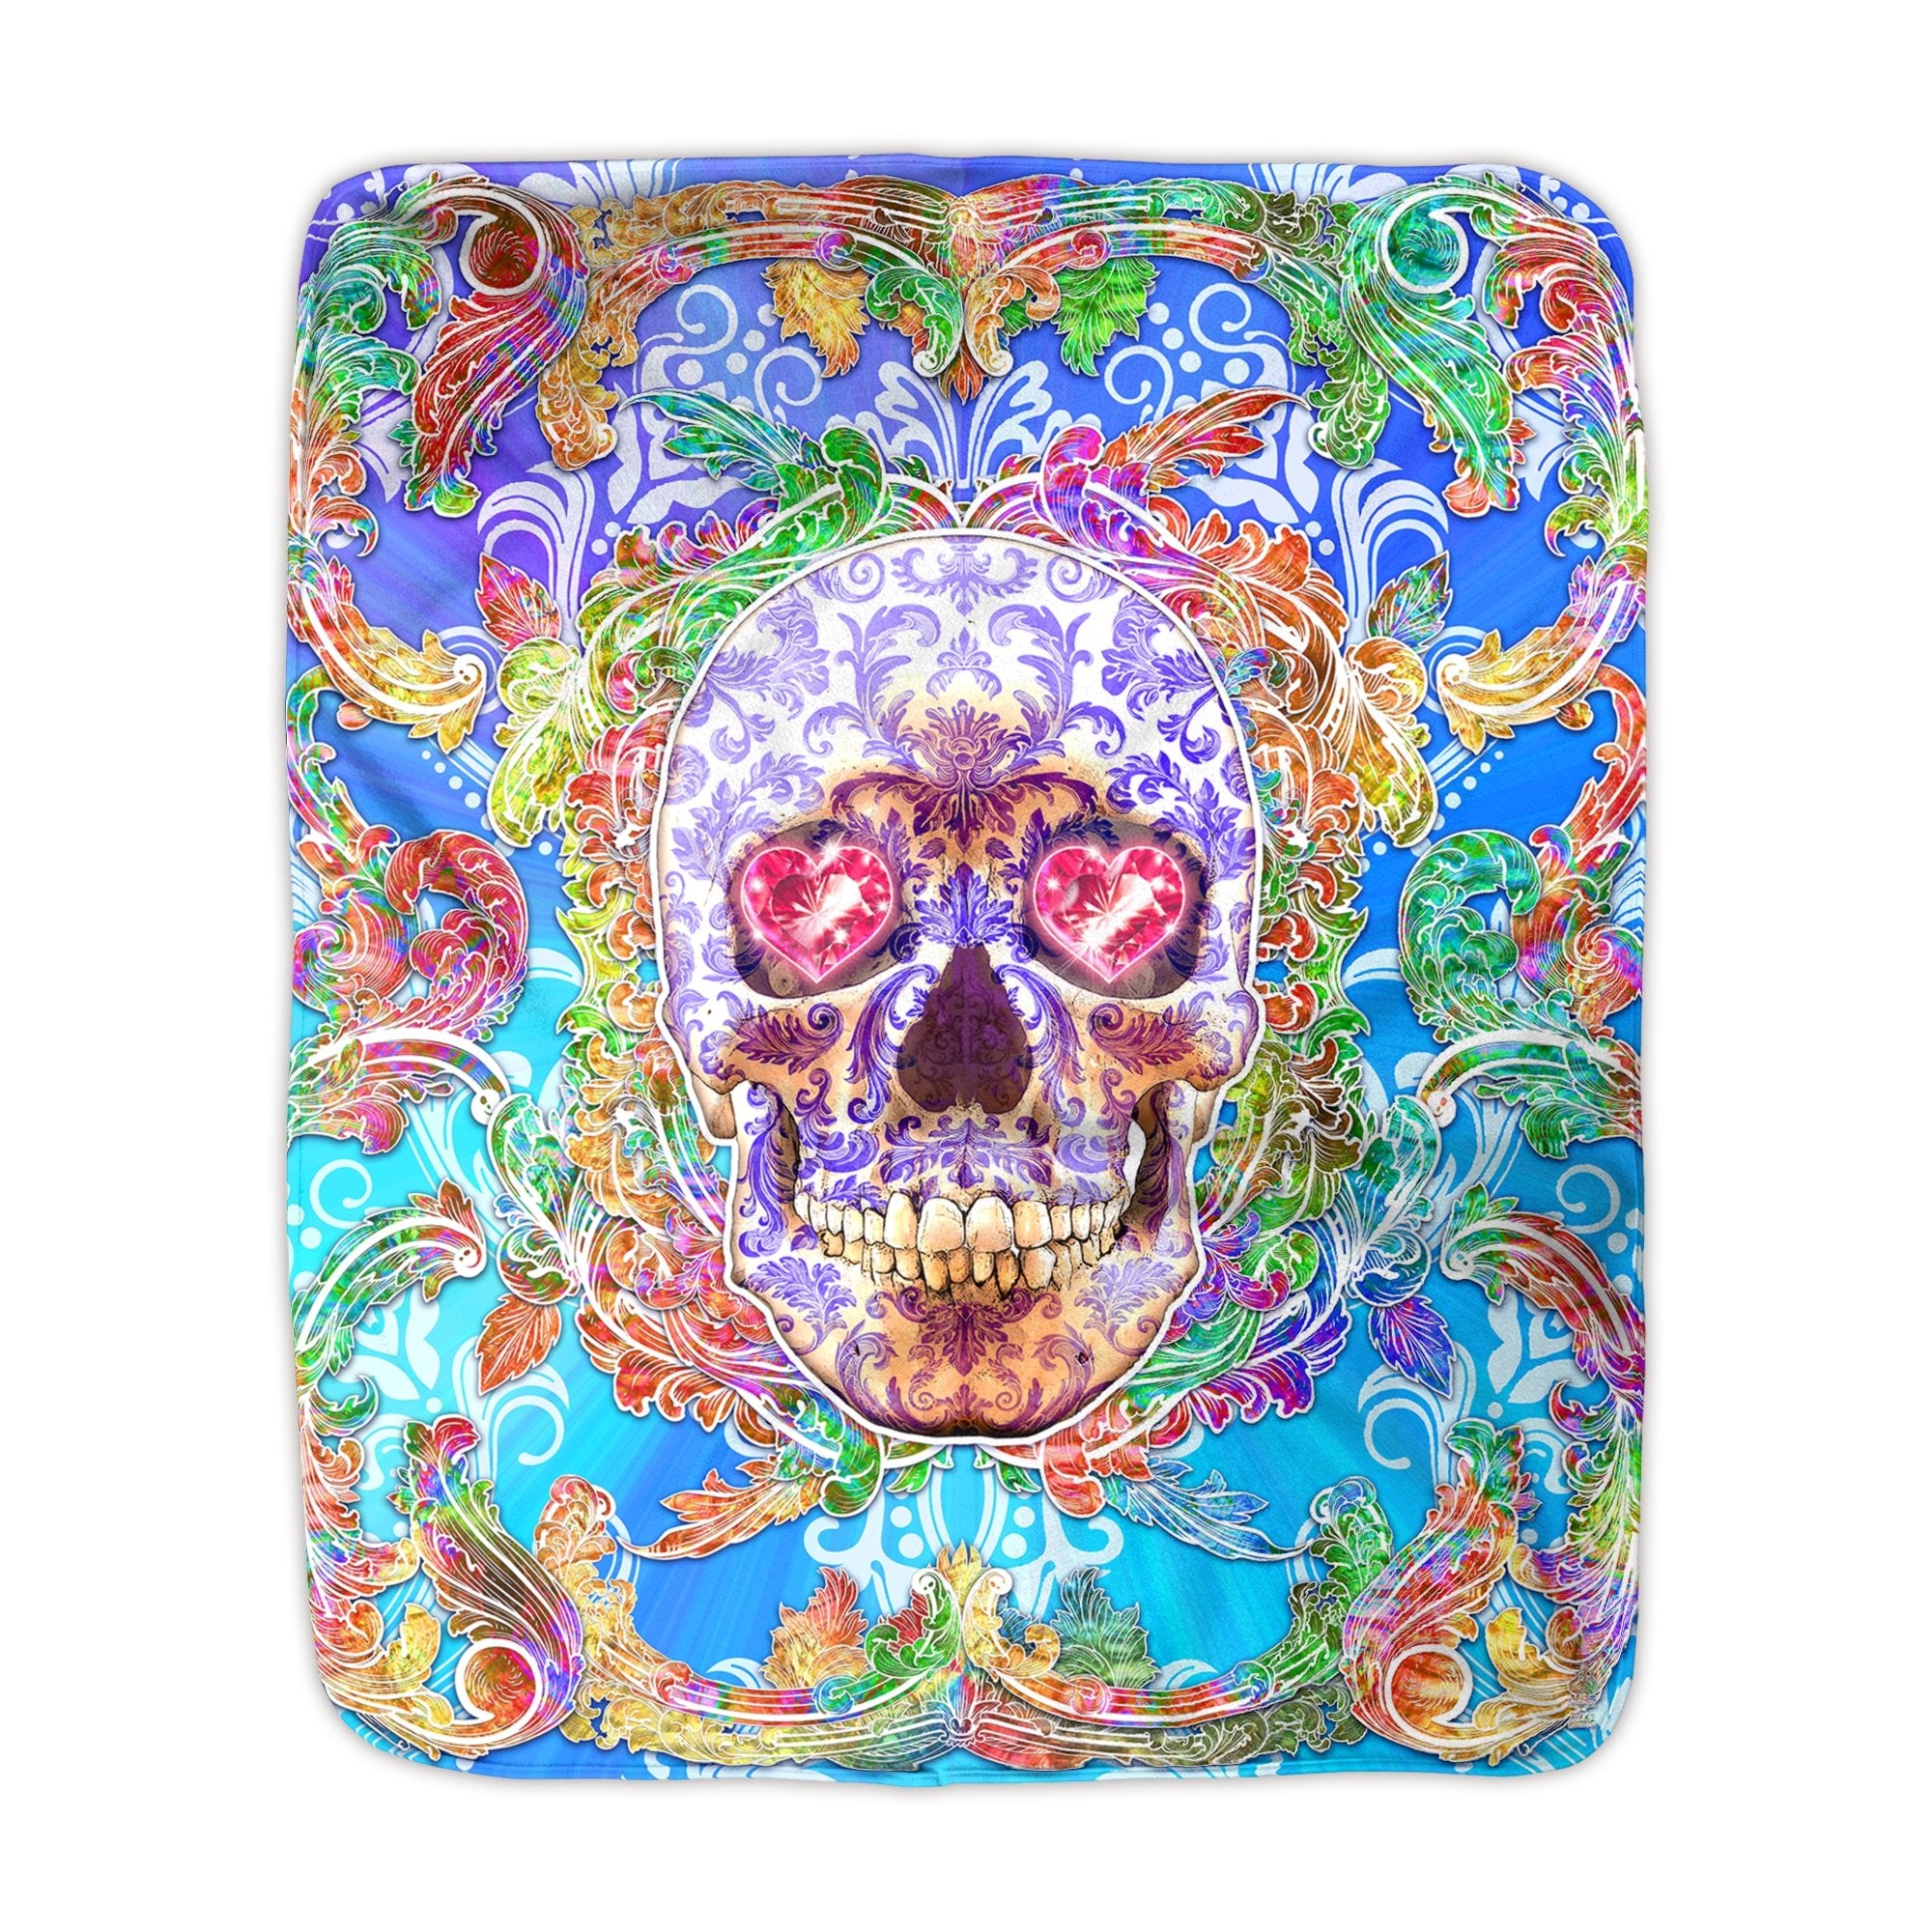 Sugar Skull Throw Fleece Blanket, Macabre Art, Ecclectic and Indie Home Decor, Eclectic and Funky Gift - Psy Purple - Abysm Internal